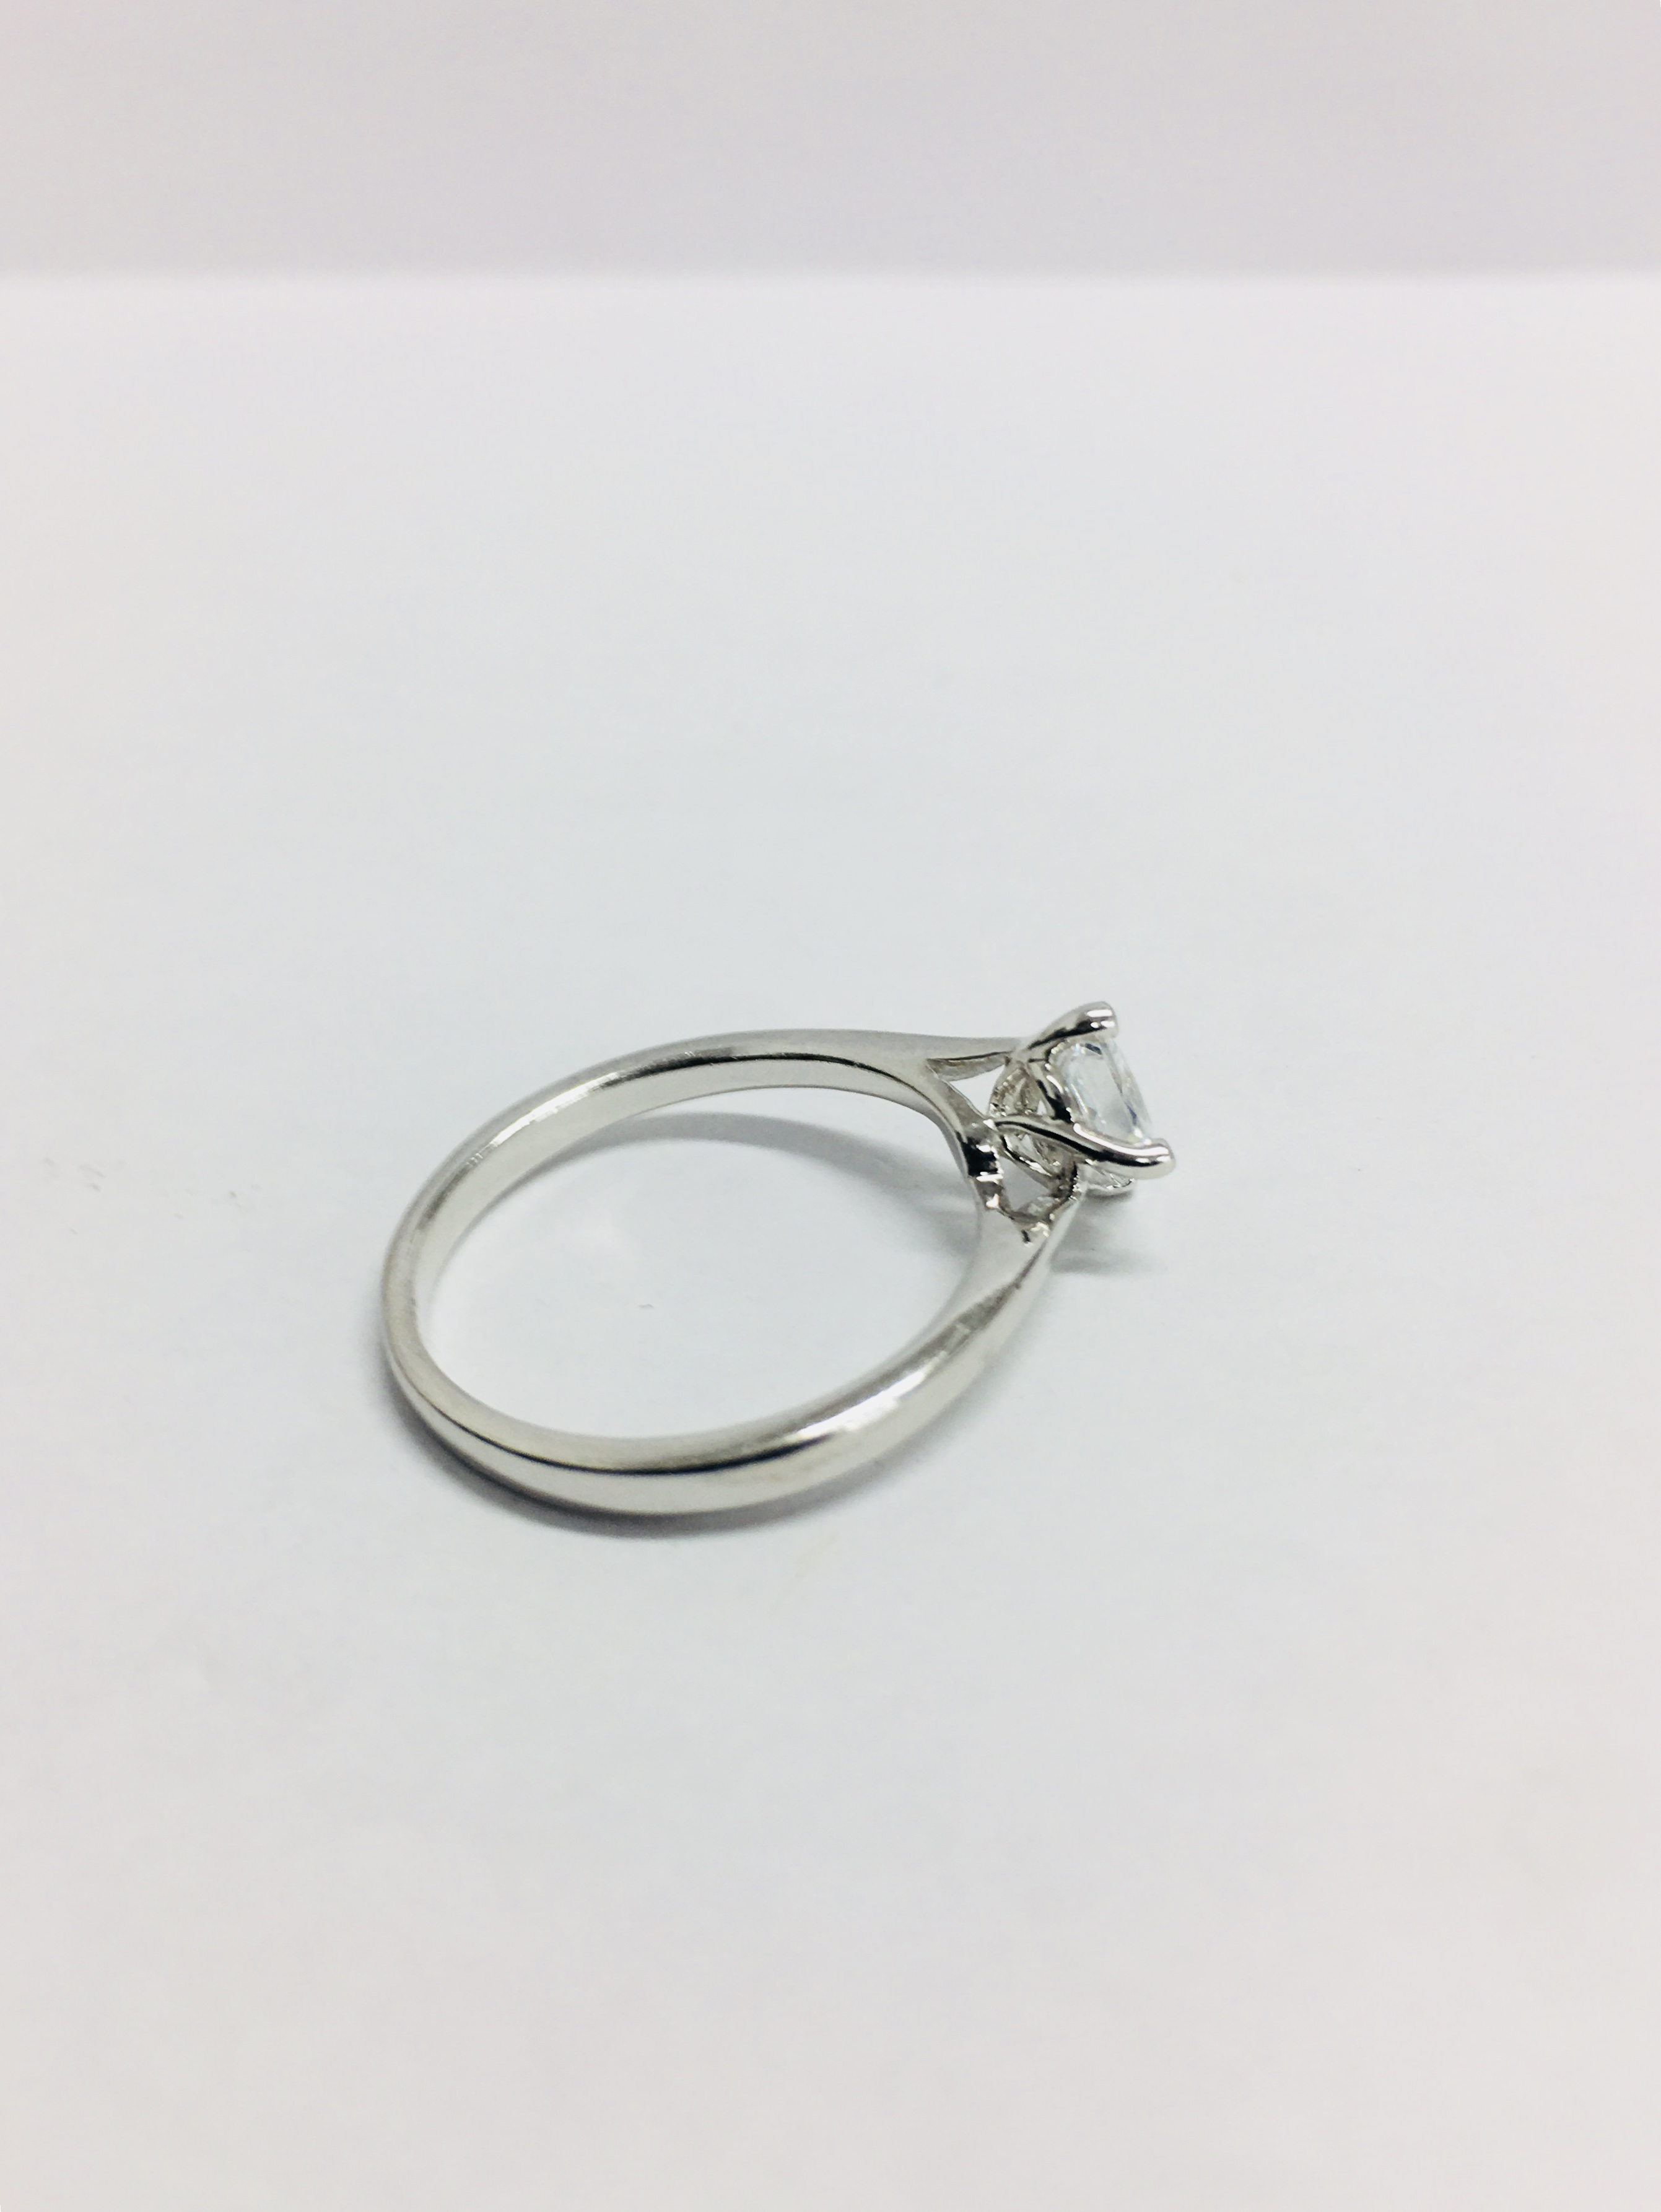 1.02Ct Princess Cut Diamond Solitaire Ring, - Image 6 of 7